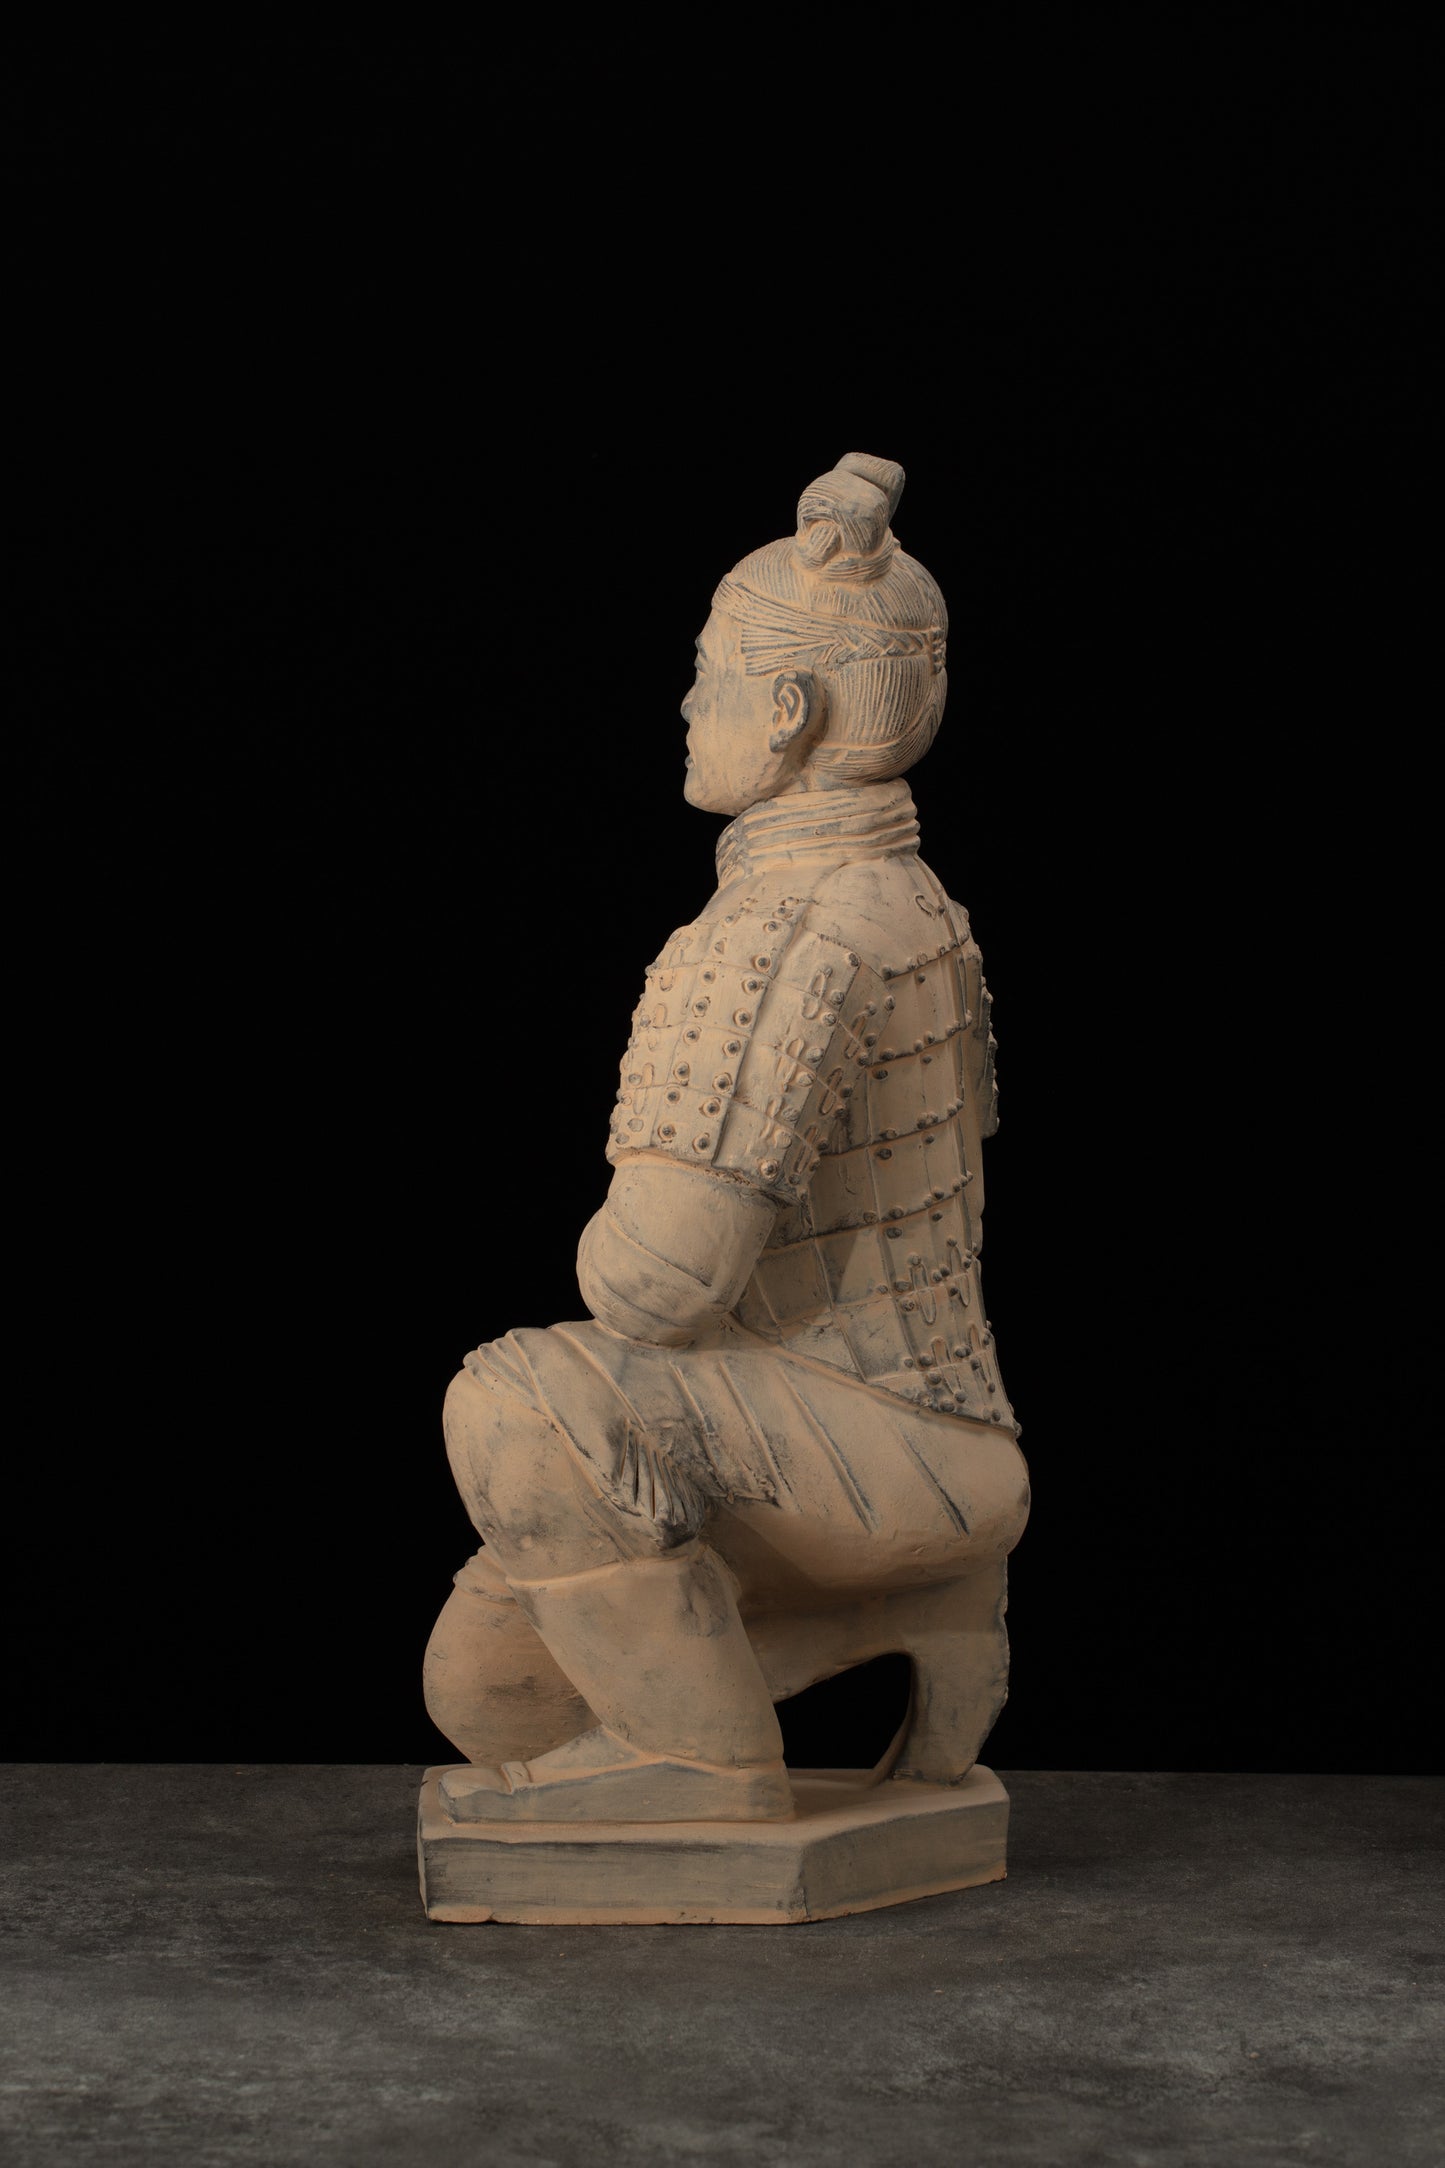 55CM Kneeling Archer - CLAYARMY-Side profile emphasizing the dynamic pose and meticulous craftsmanship of the 55CM Kneeling Archer.